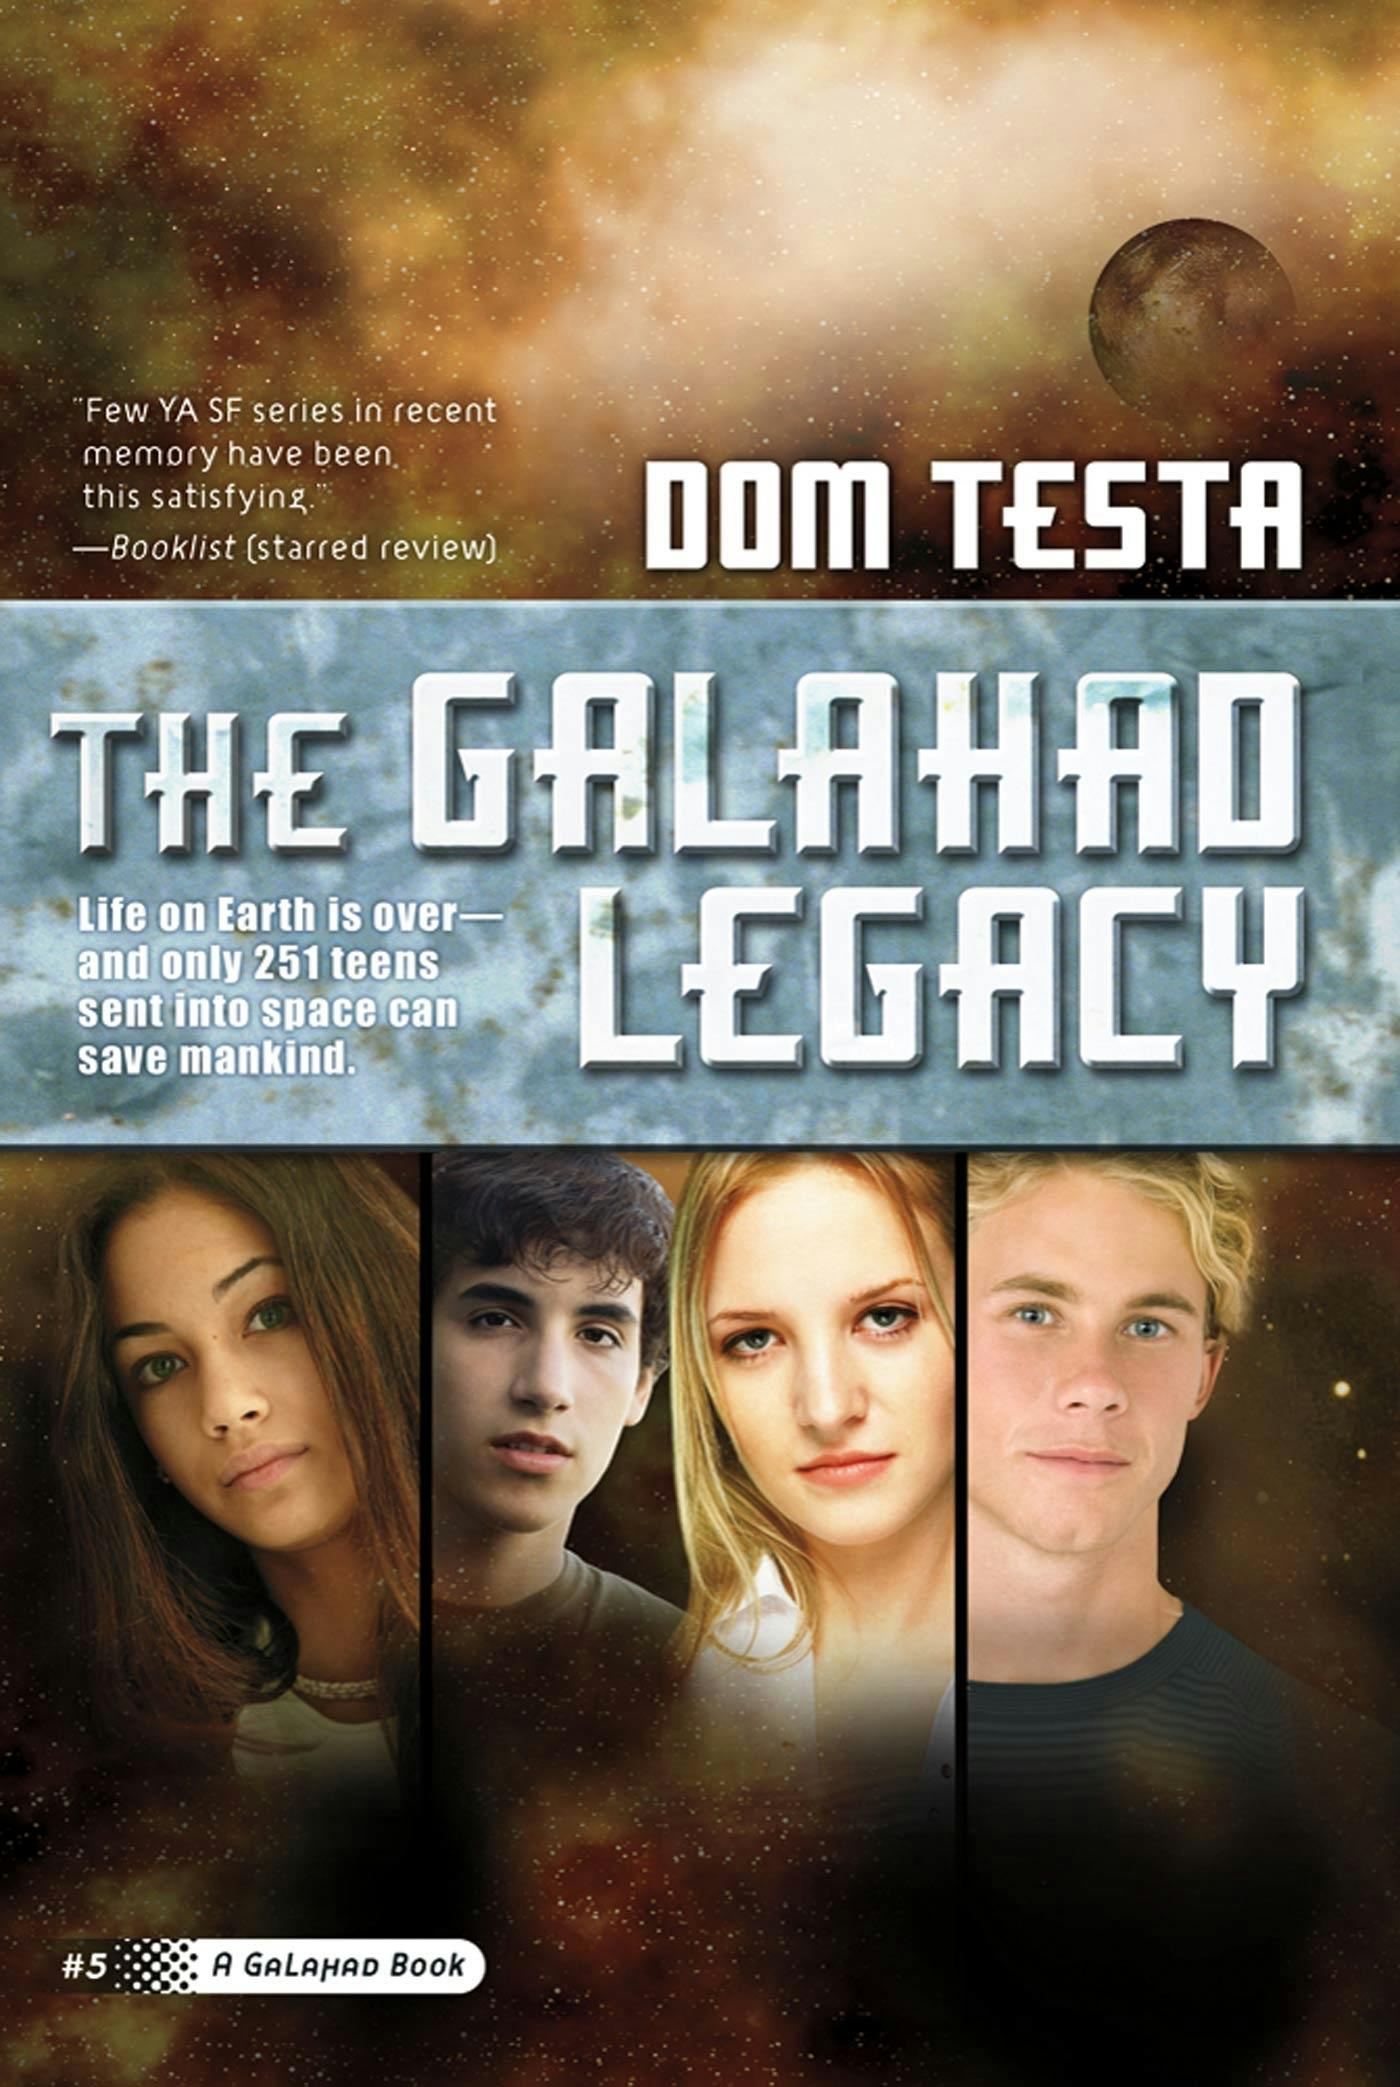 Cover for the book titled as: The Galahad Legacy